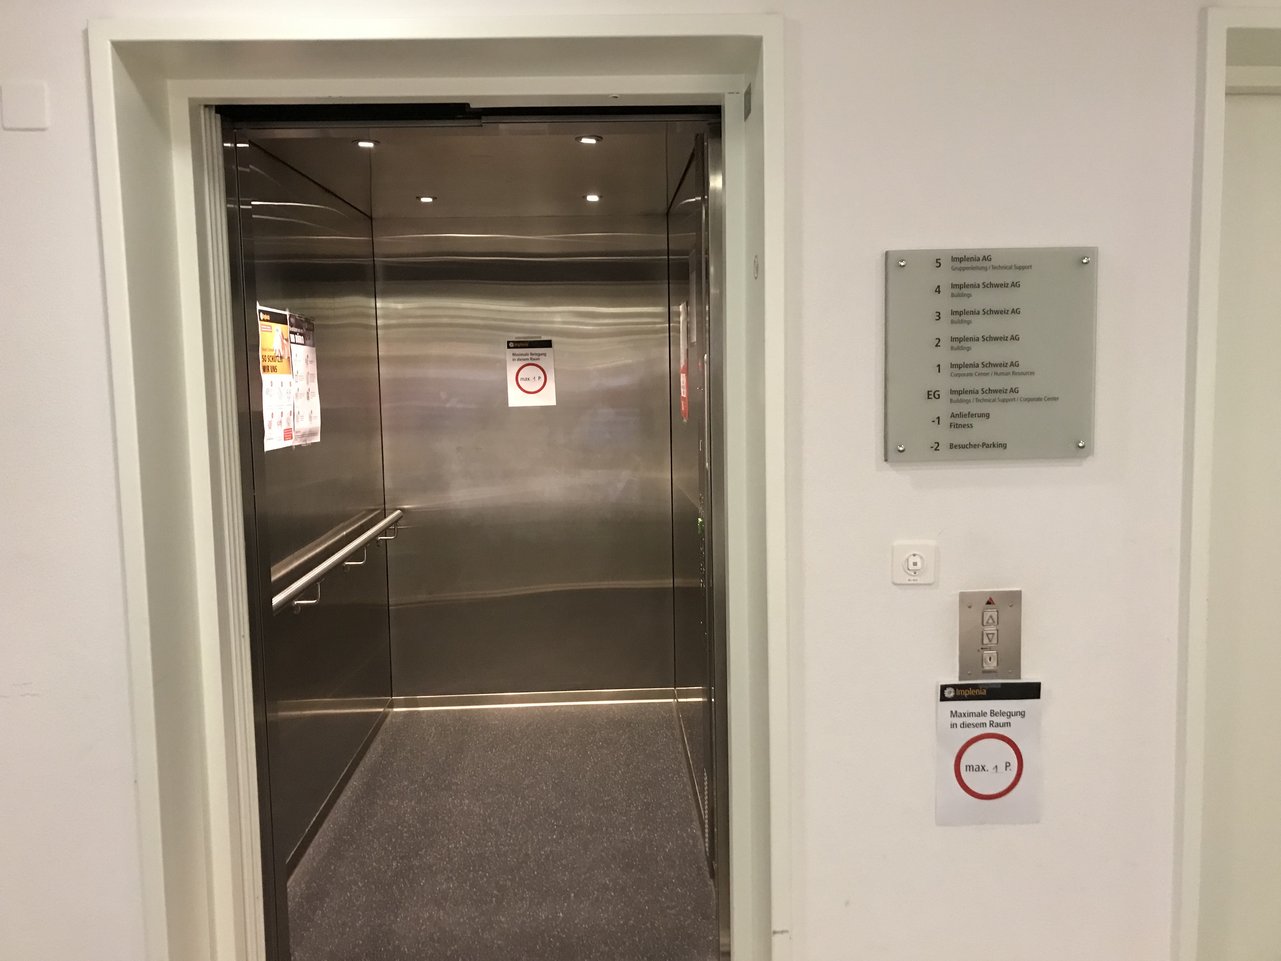 Elevator: Depending on size, only a limited number of people are allowed.